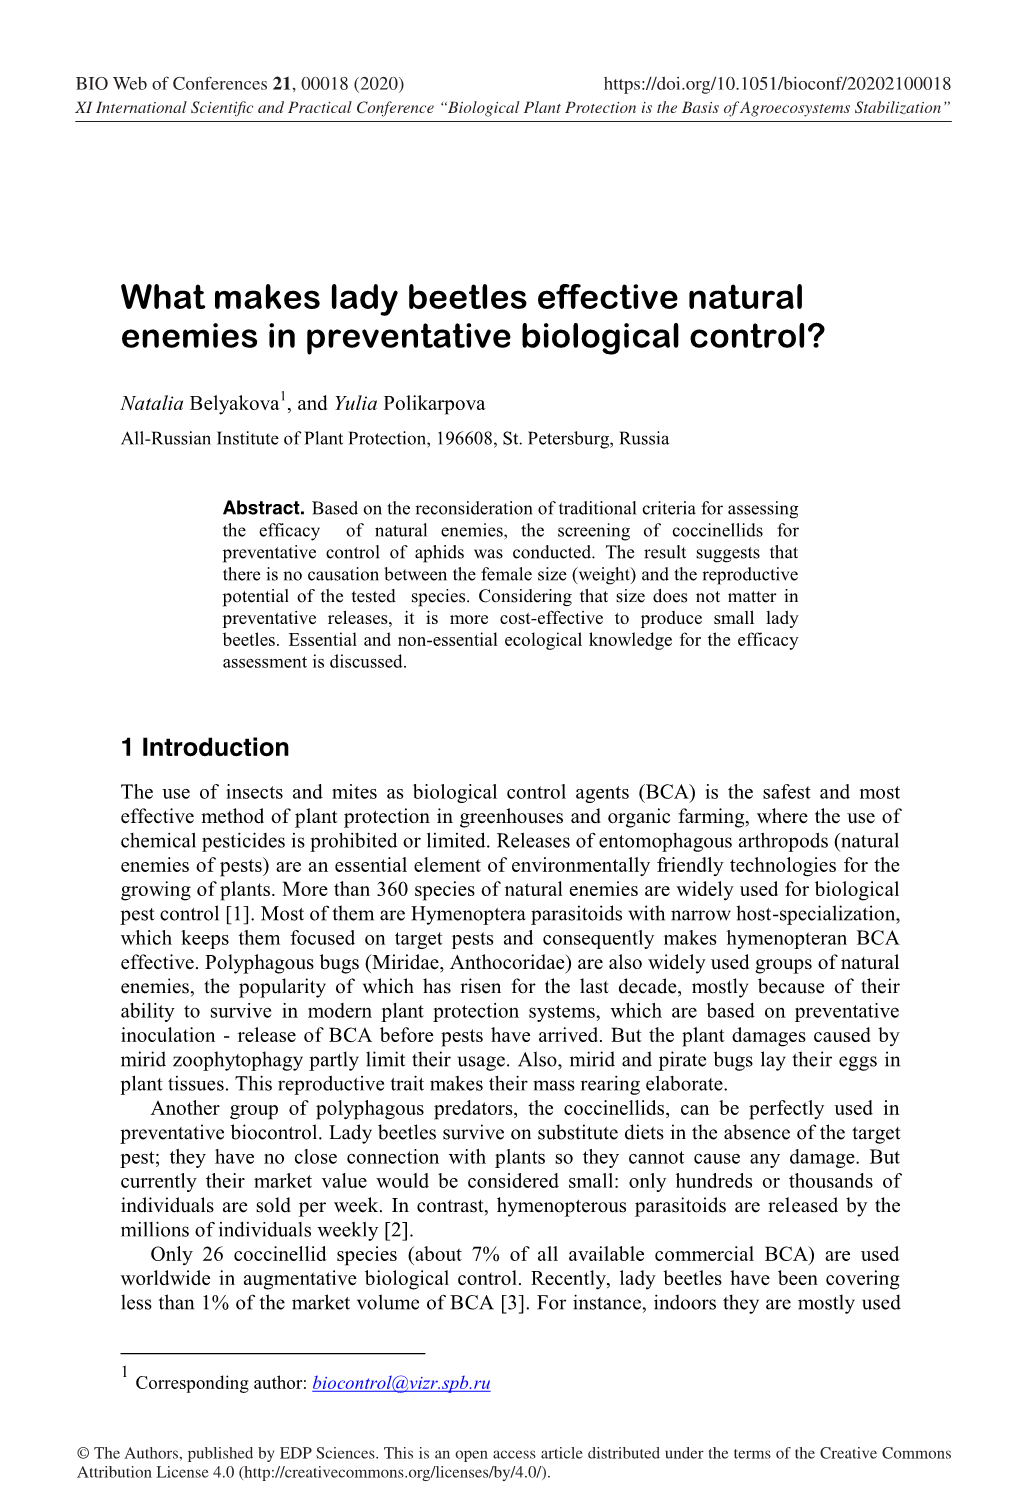 What Makes Lady Beetles Effective Natural Enemies in Preventative Biological Control?